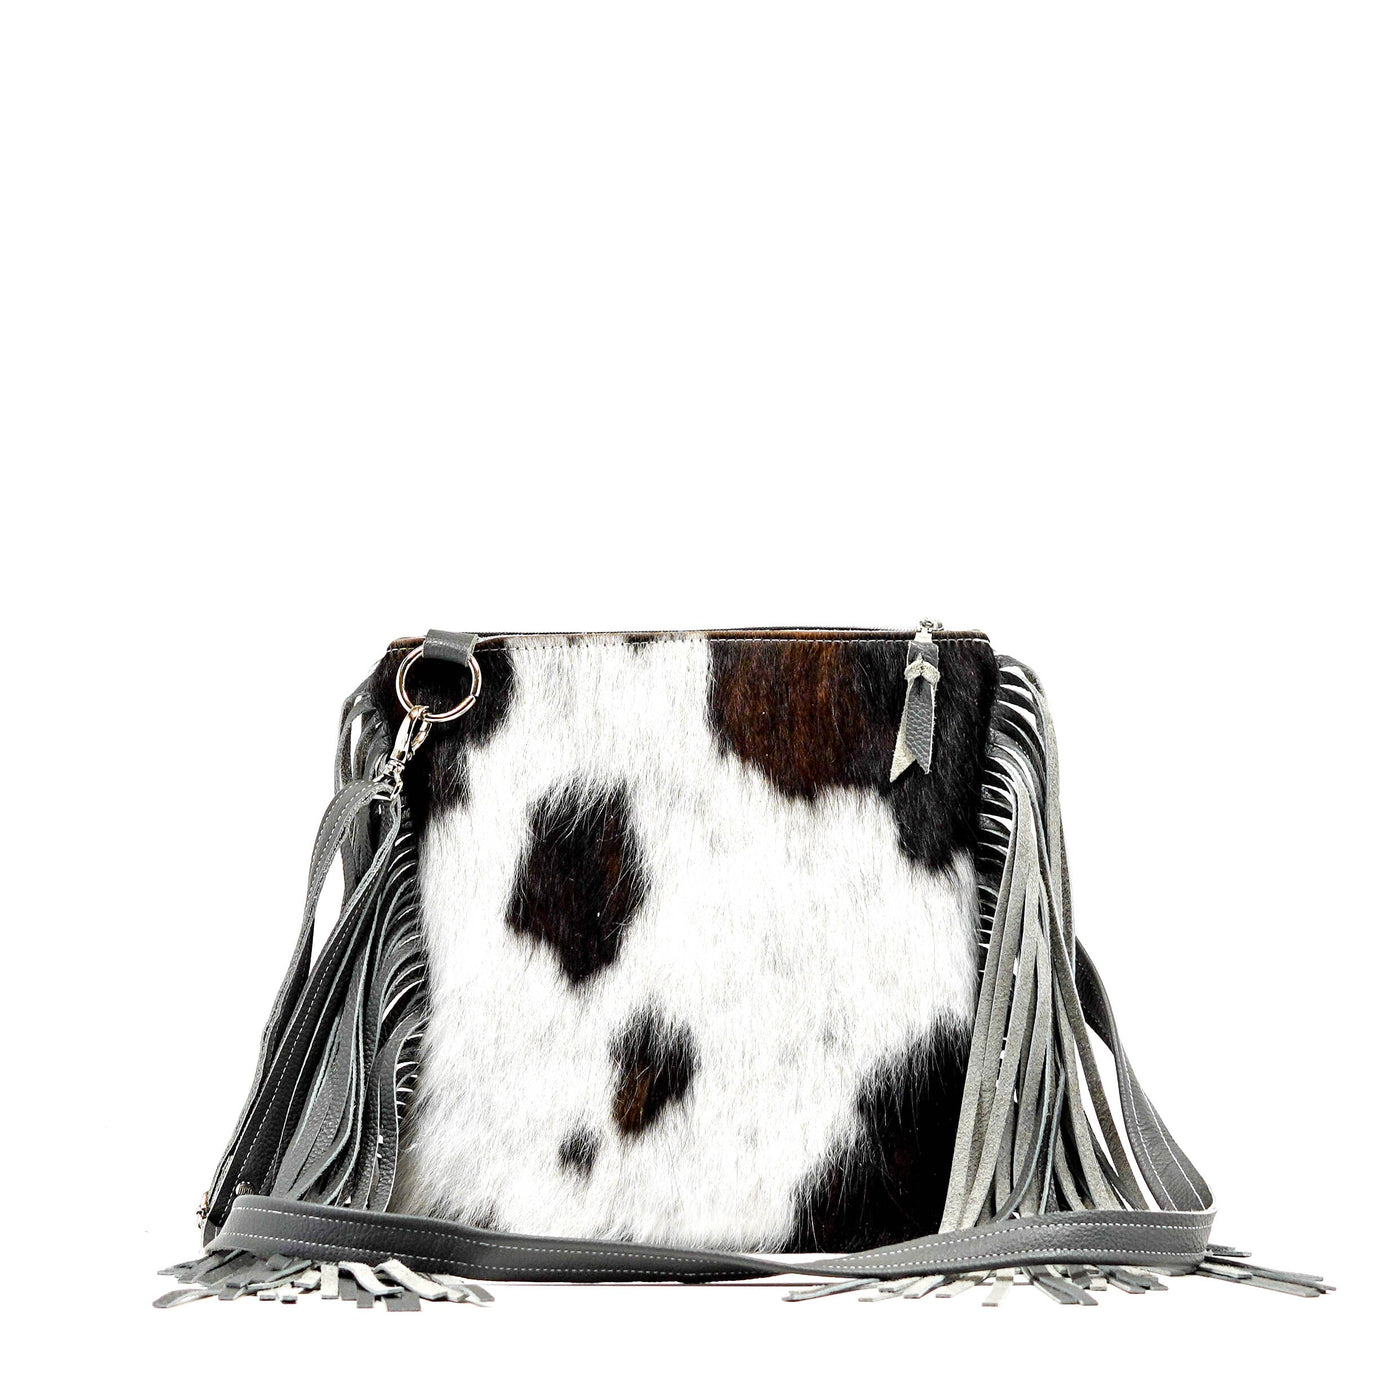 Shania - Tricolor w/ Gray Leather-Shania-Western-Cowhide-Bags-Handmade-Products-Gifts-Dancing Cactus Designs